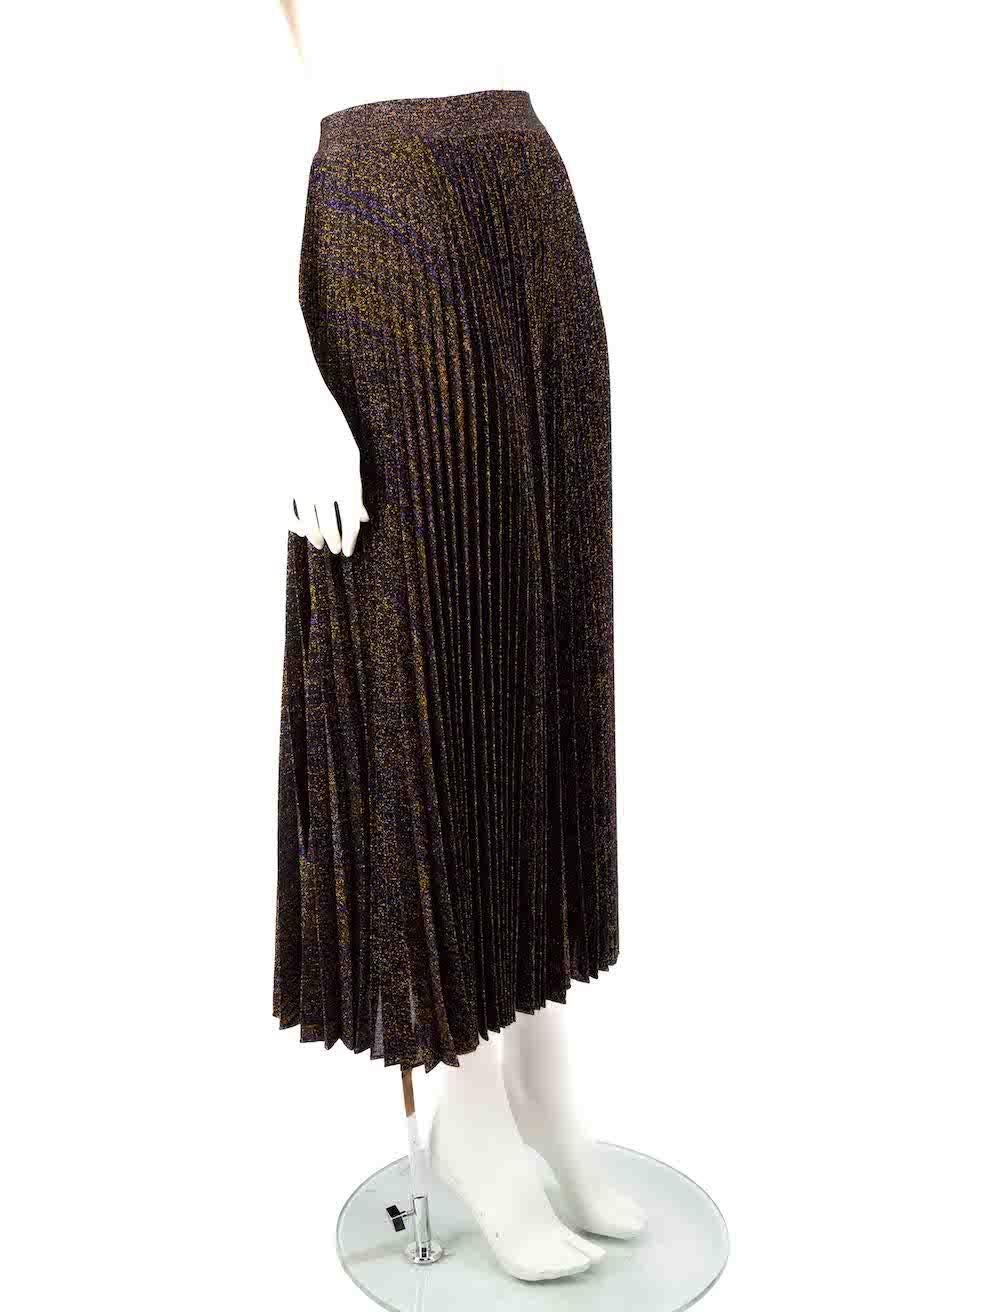 CONDITION is Very good. Hardly any visible wear to the skirt is evident on this used Missoni designer resale item.
 
 
 
 Details
 
 
 Multicolour- black, purple, gold
 
 Polyester
 
 Skirt
 
 Pleated
 
 Metallic thread
 
 Midi
 
 Elasticated